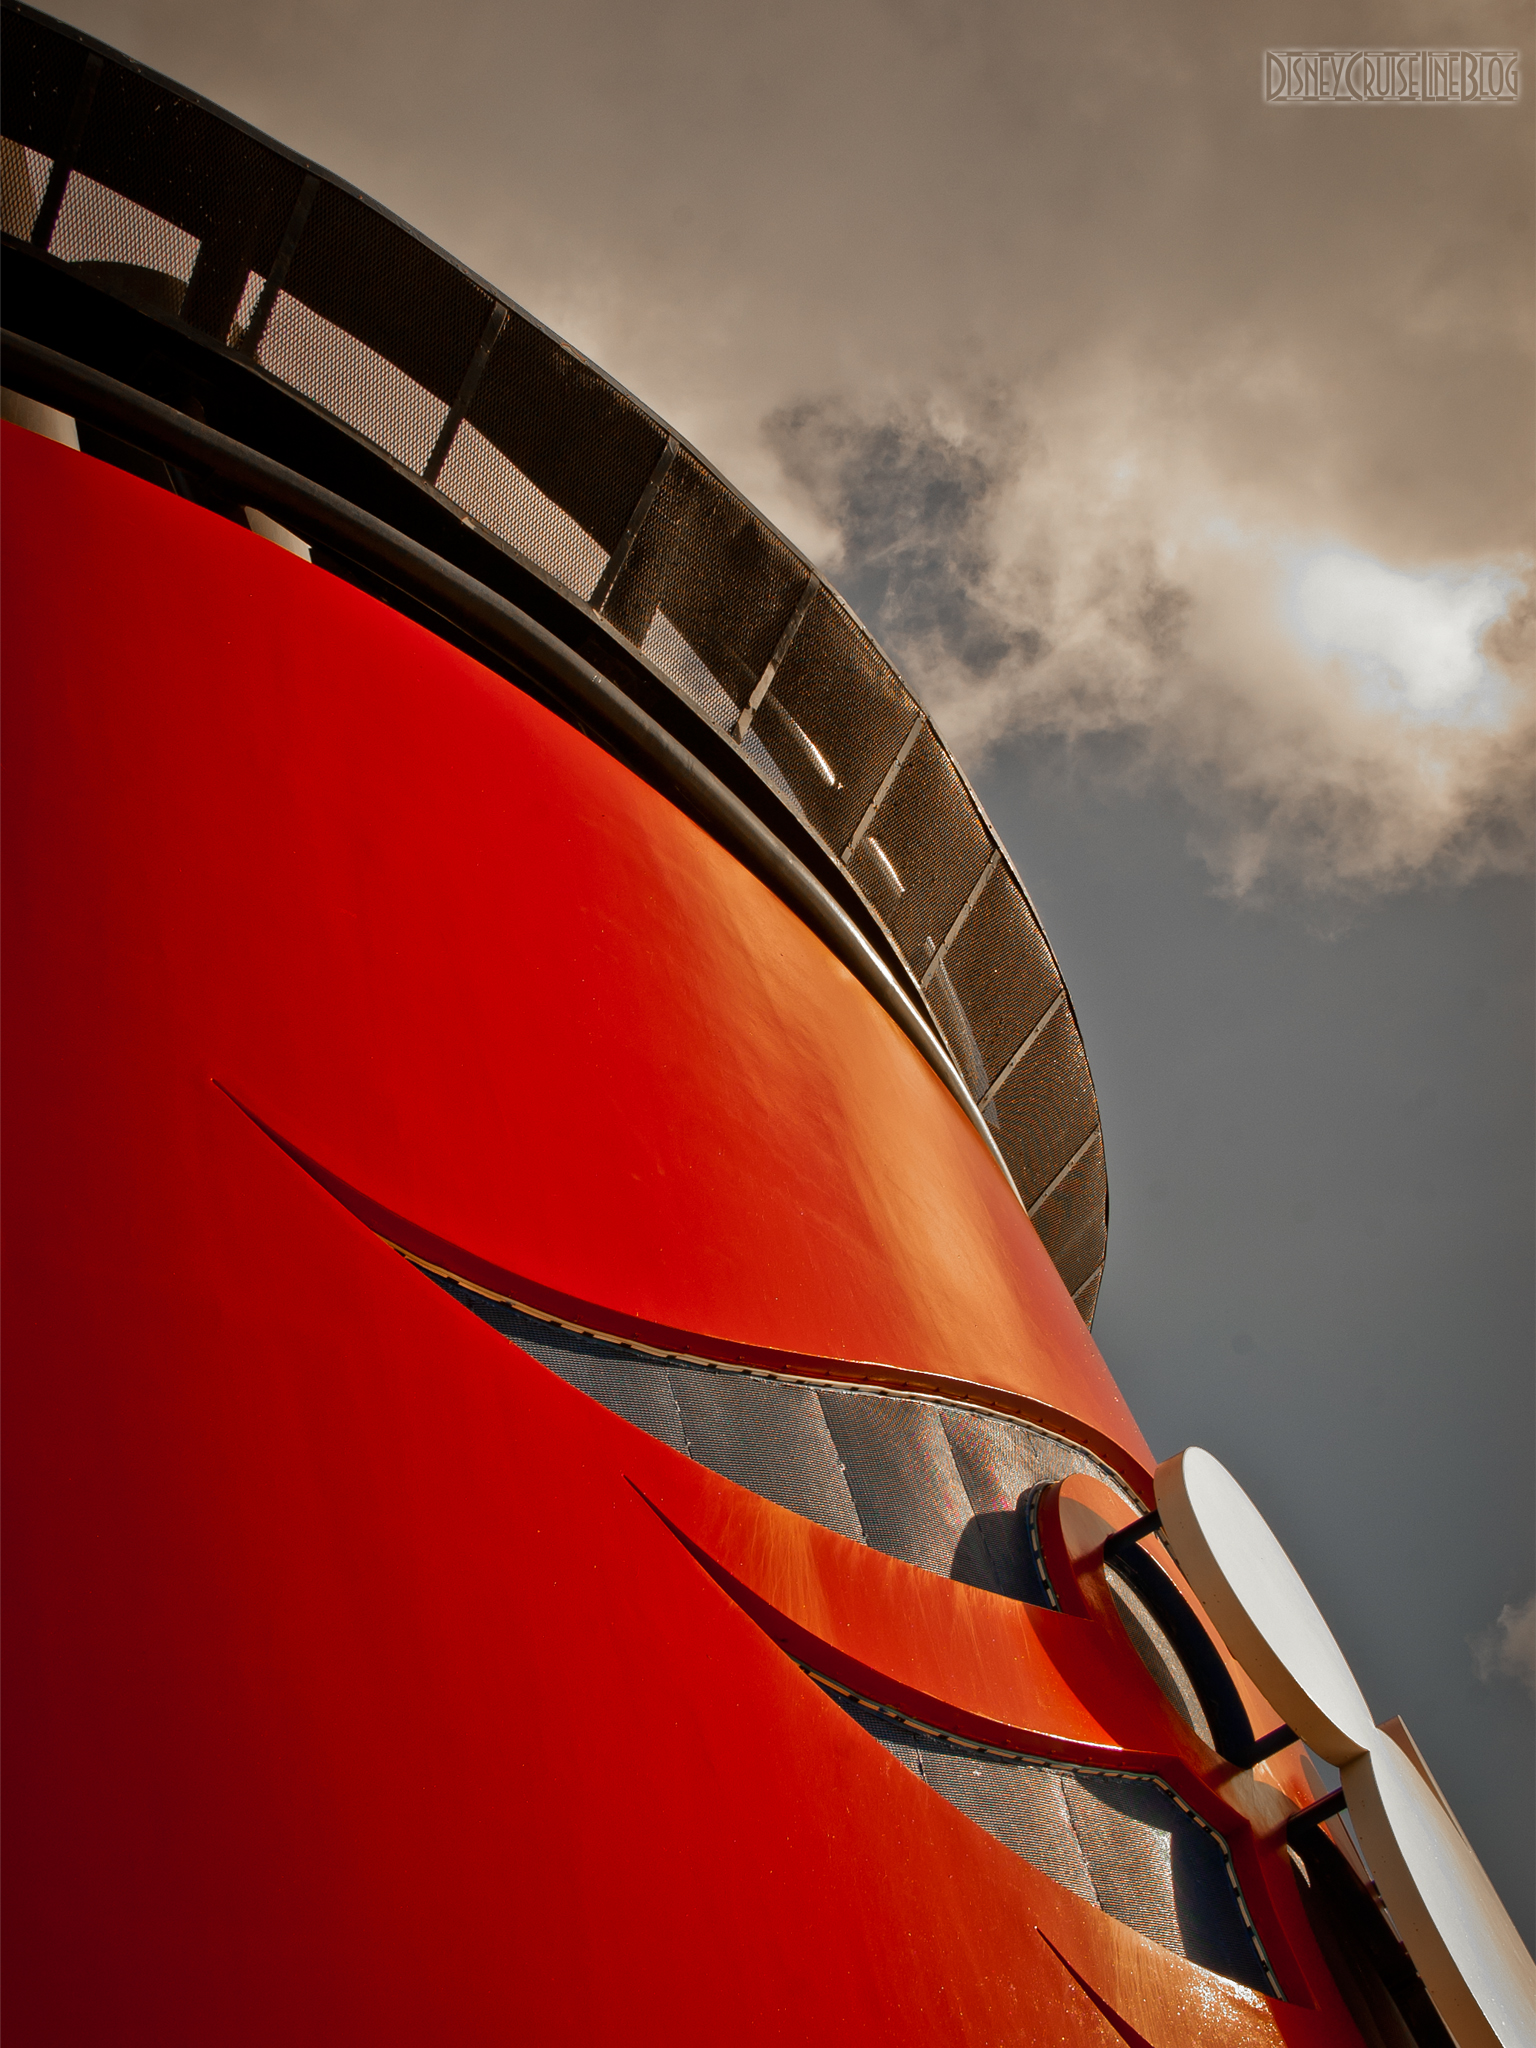 Disney Cruise Inspired Wallpapers The Disney Cruise Line Blog